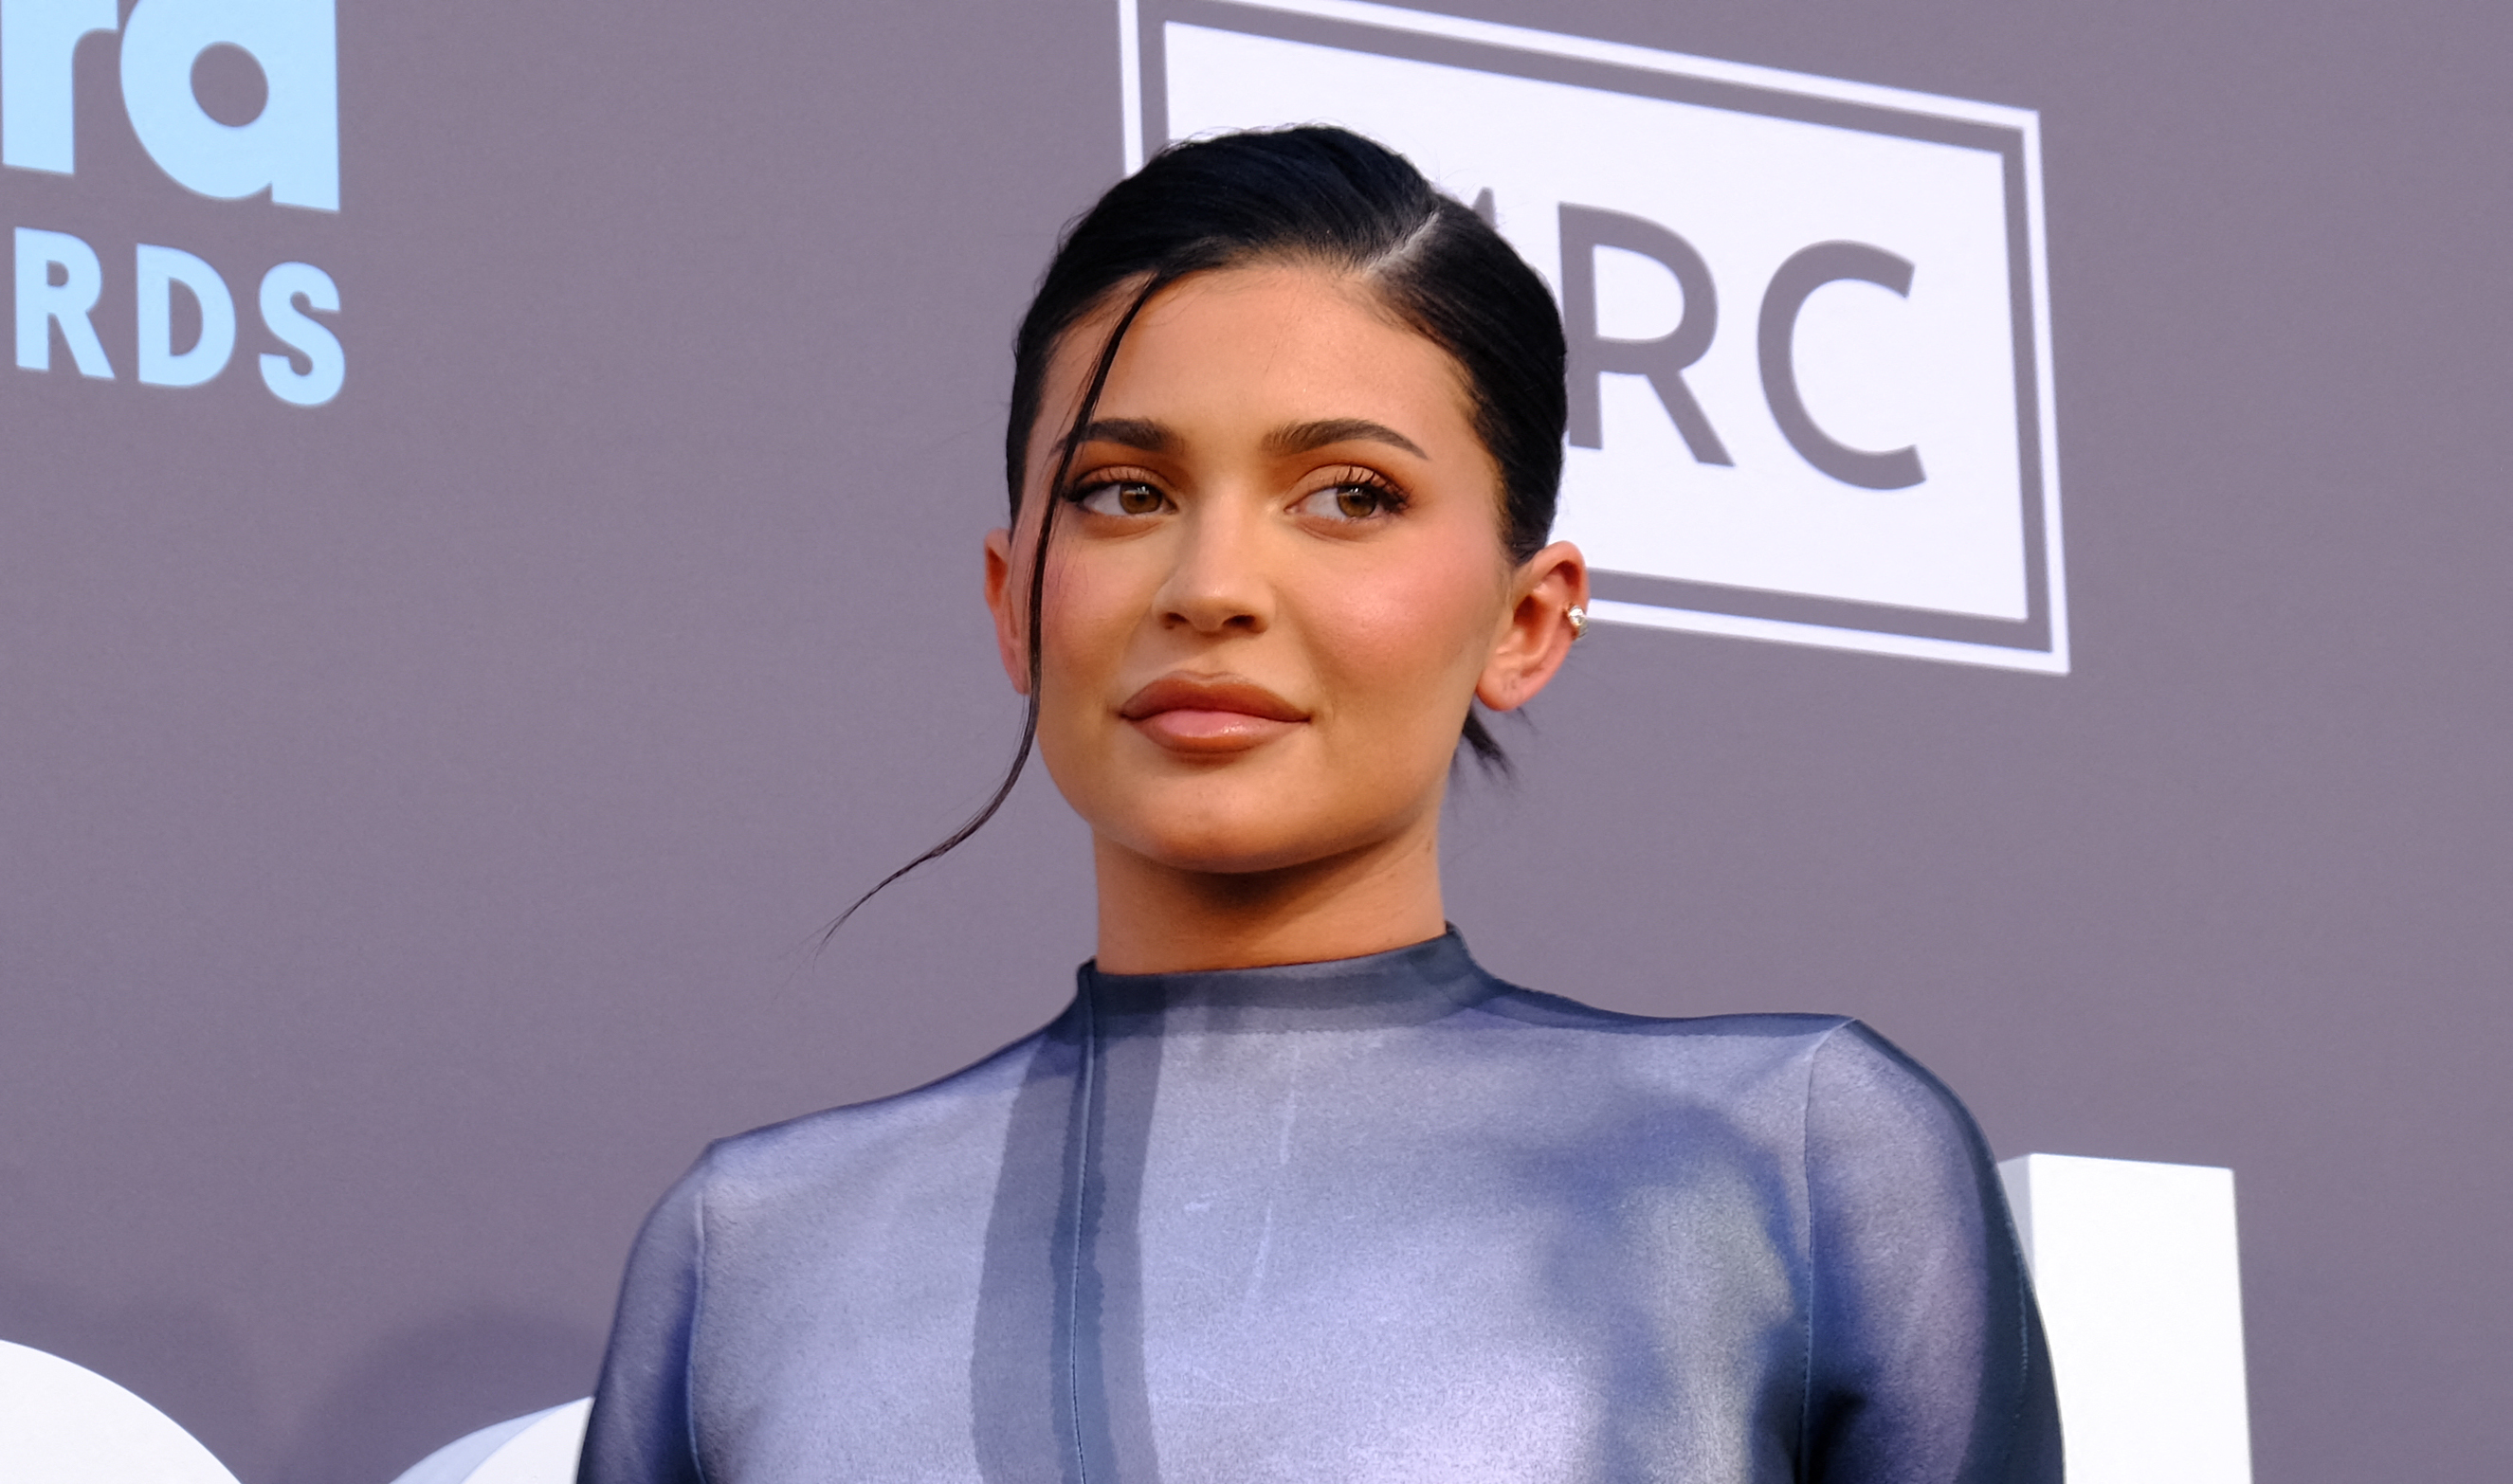 Kylie Jenner S Hilarious Filter Video Of Kendall And Kris Amasses 20m Views